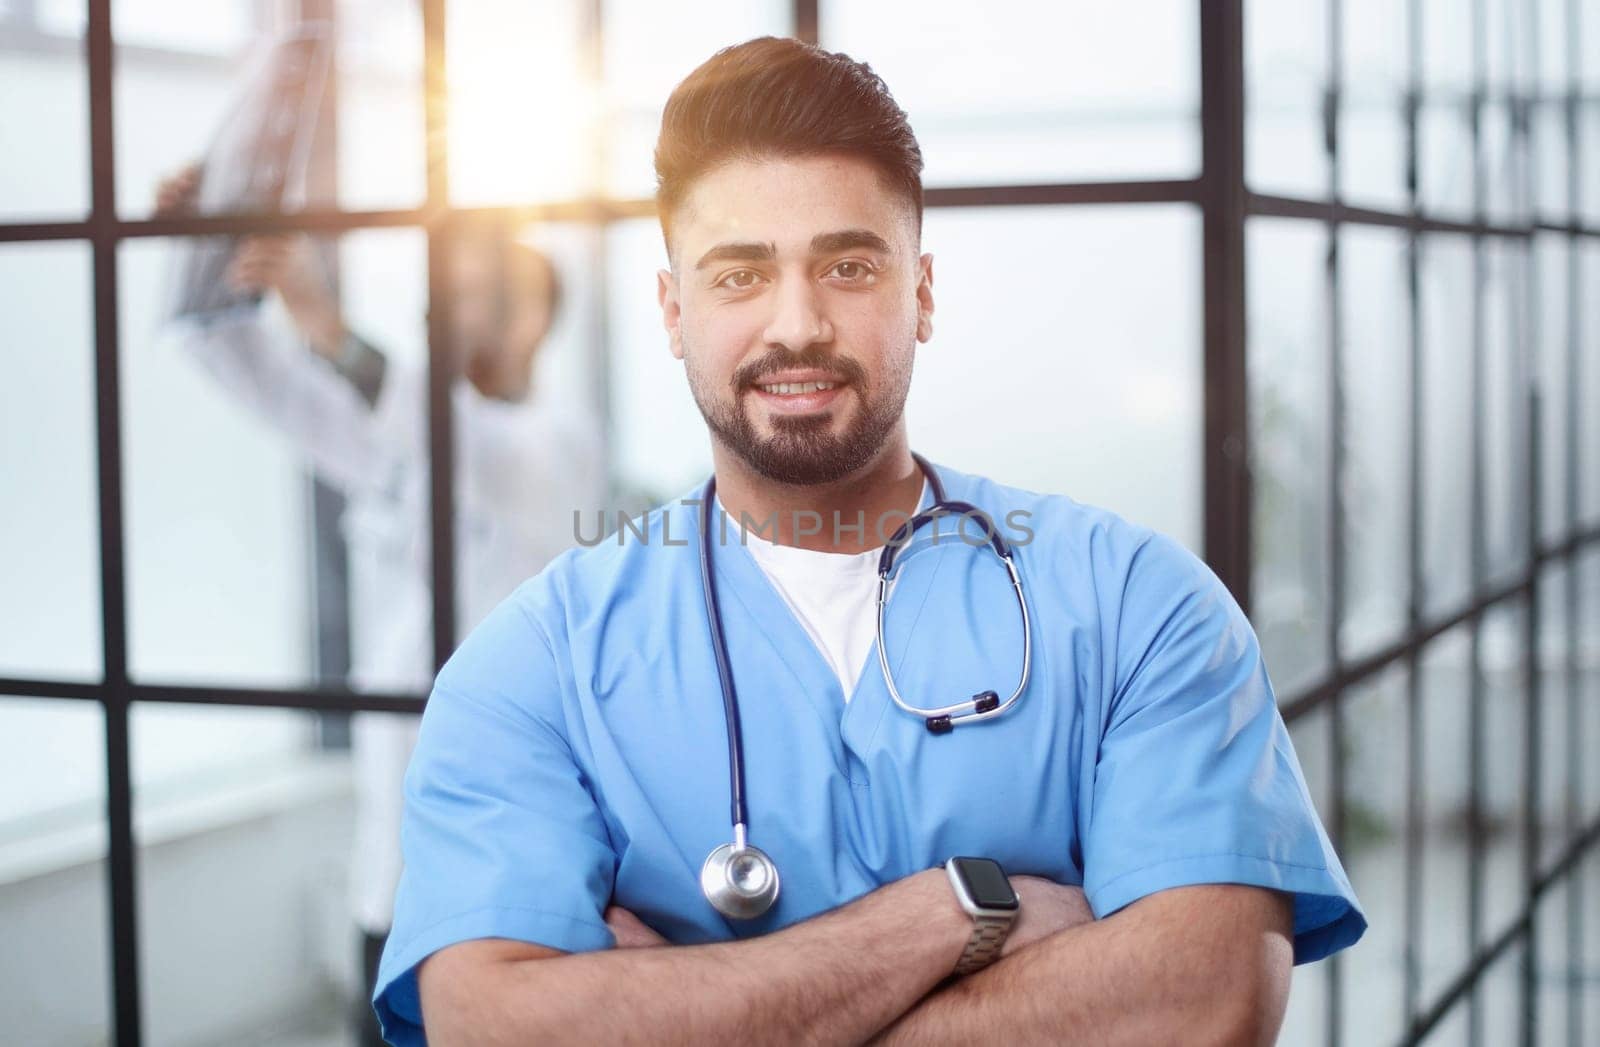 Portrait of confident male doctor standing in hospital lobby